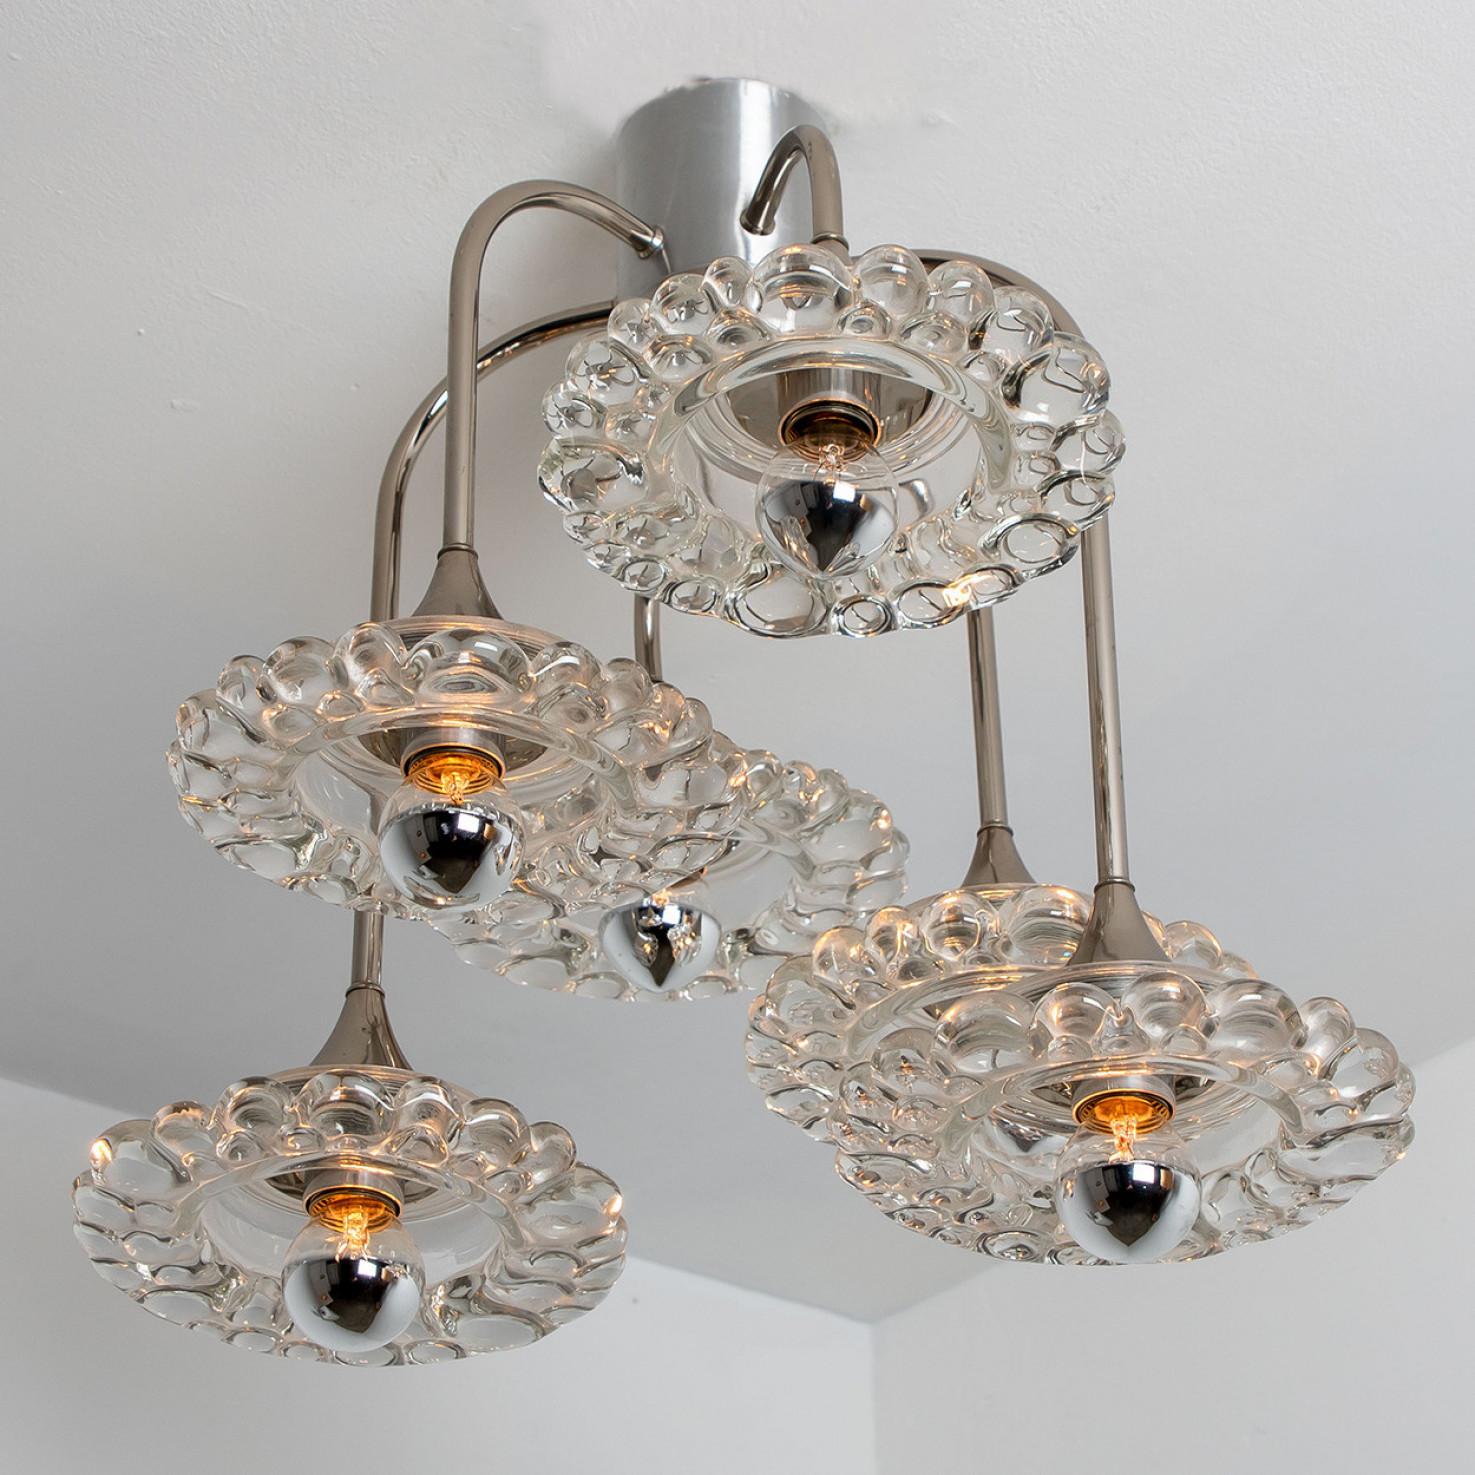 Mid-20th Century Glass and Chrome Chandelier by Hillebrand, 1960s For Sale